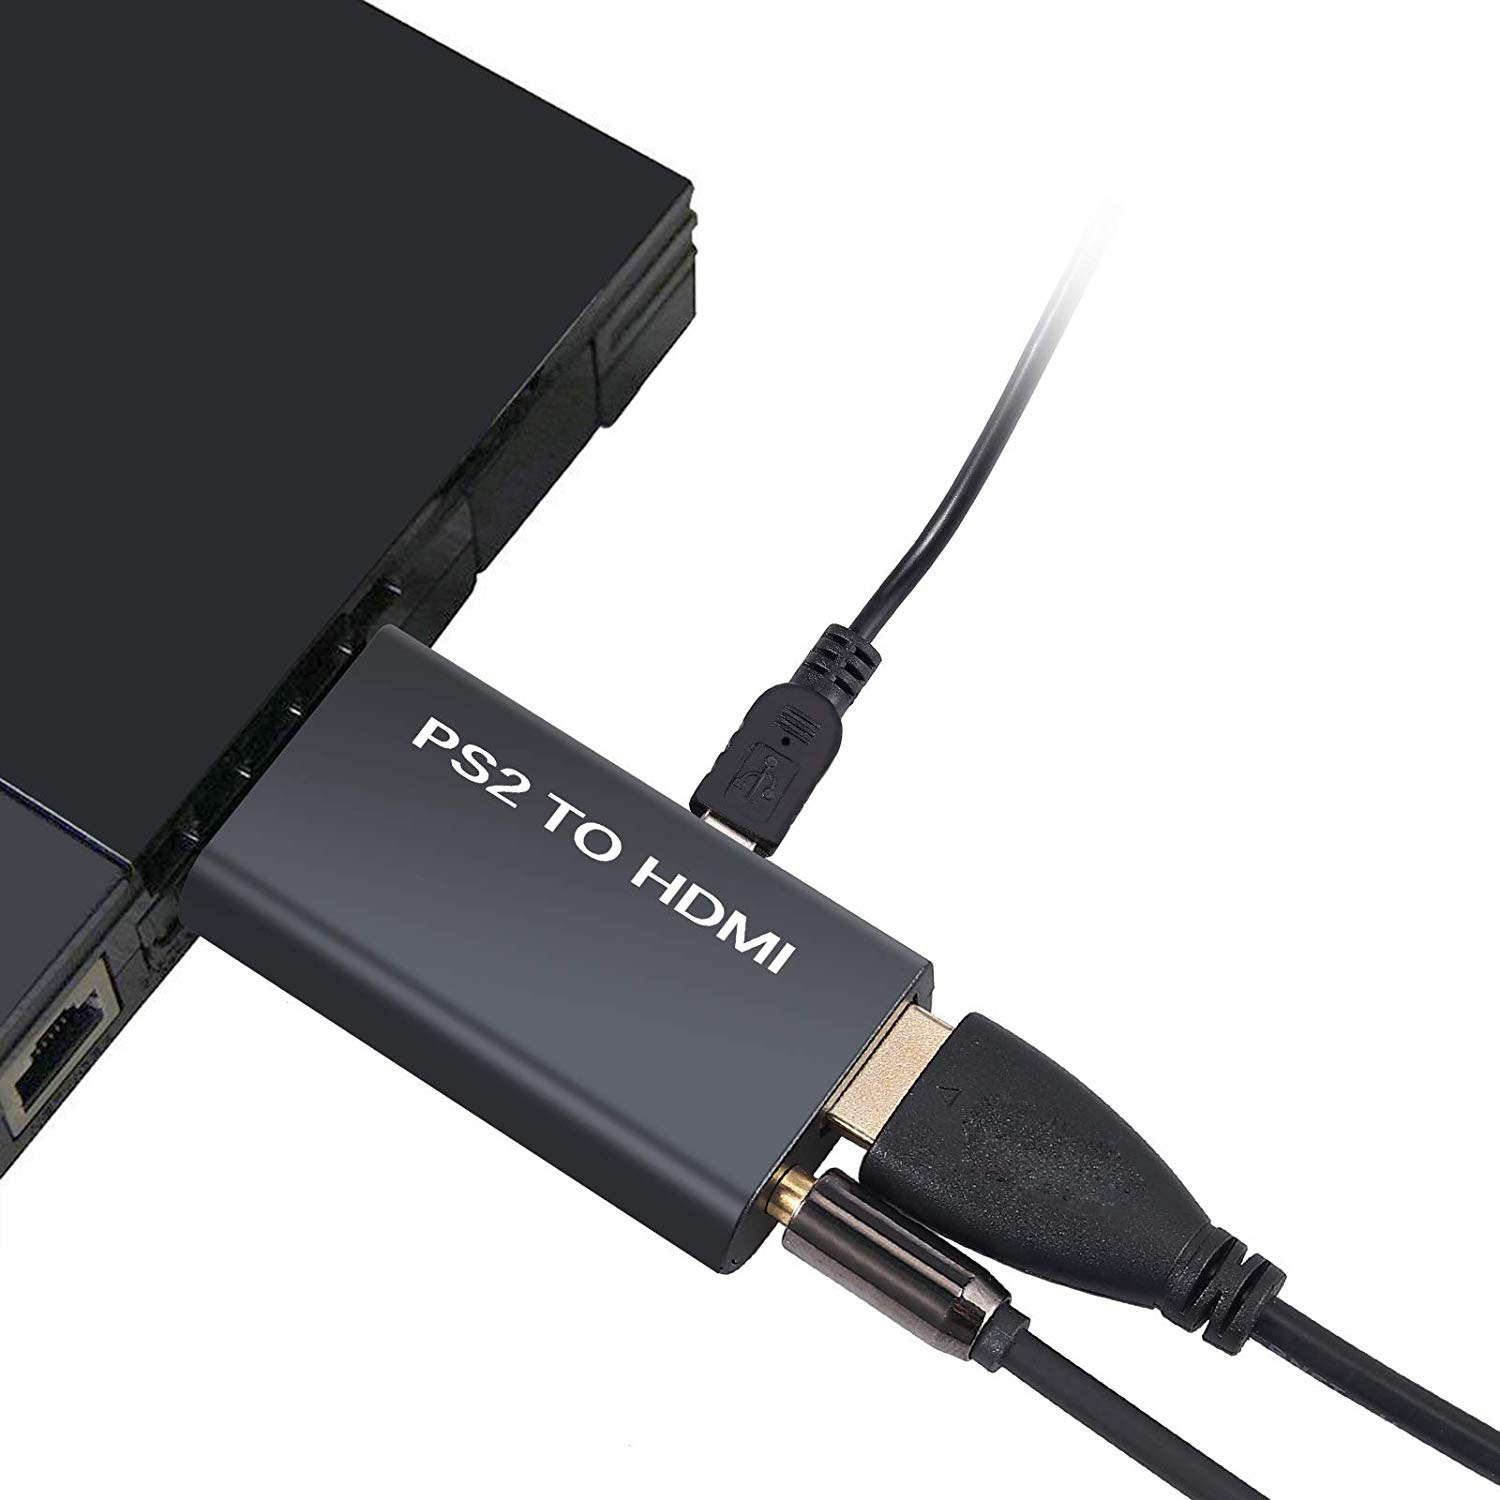 EEEkit PS2 to HDMI Converter Adapter with 3.5mm Audio ...